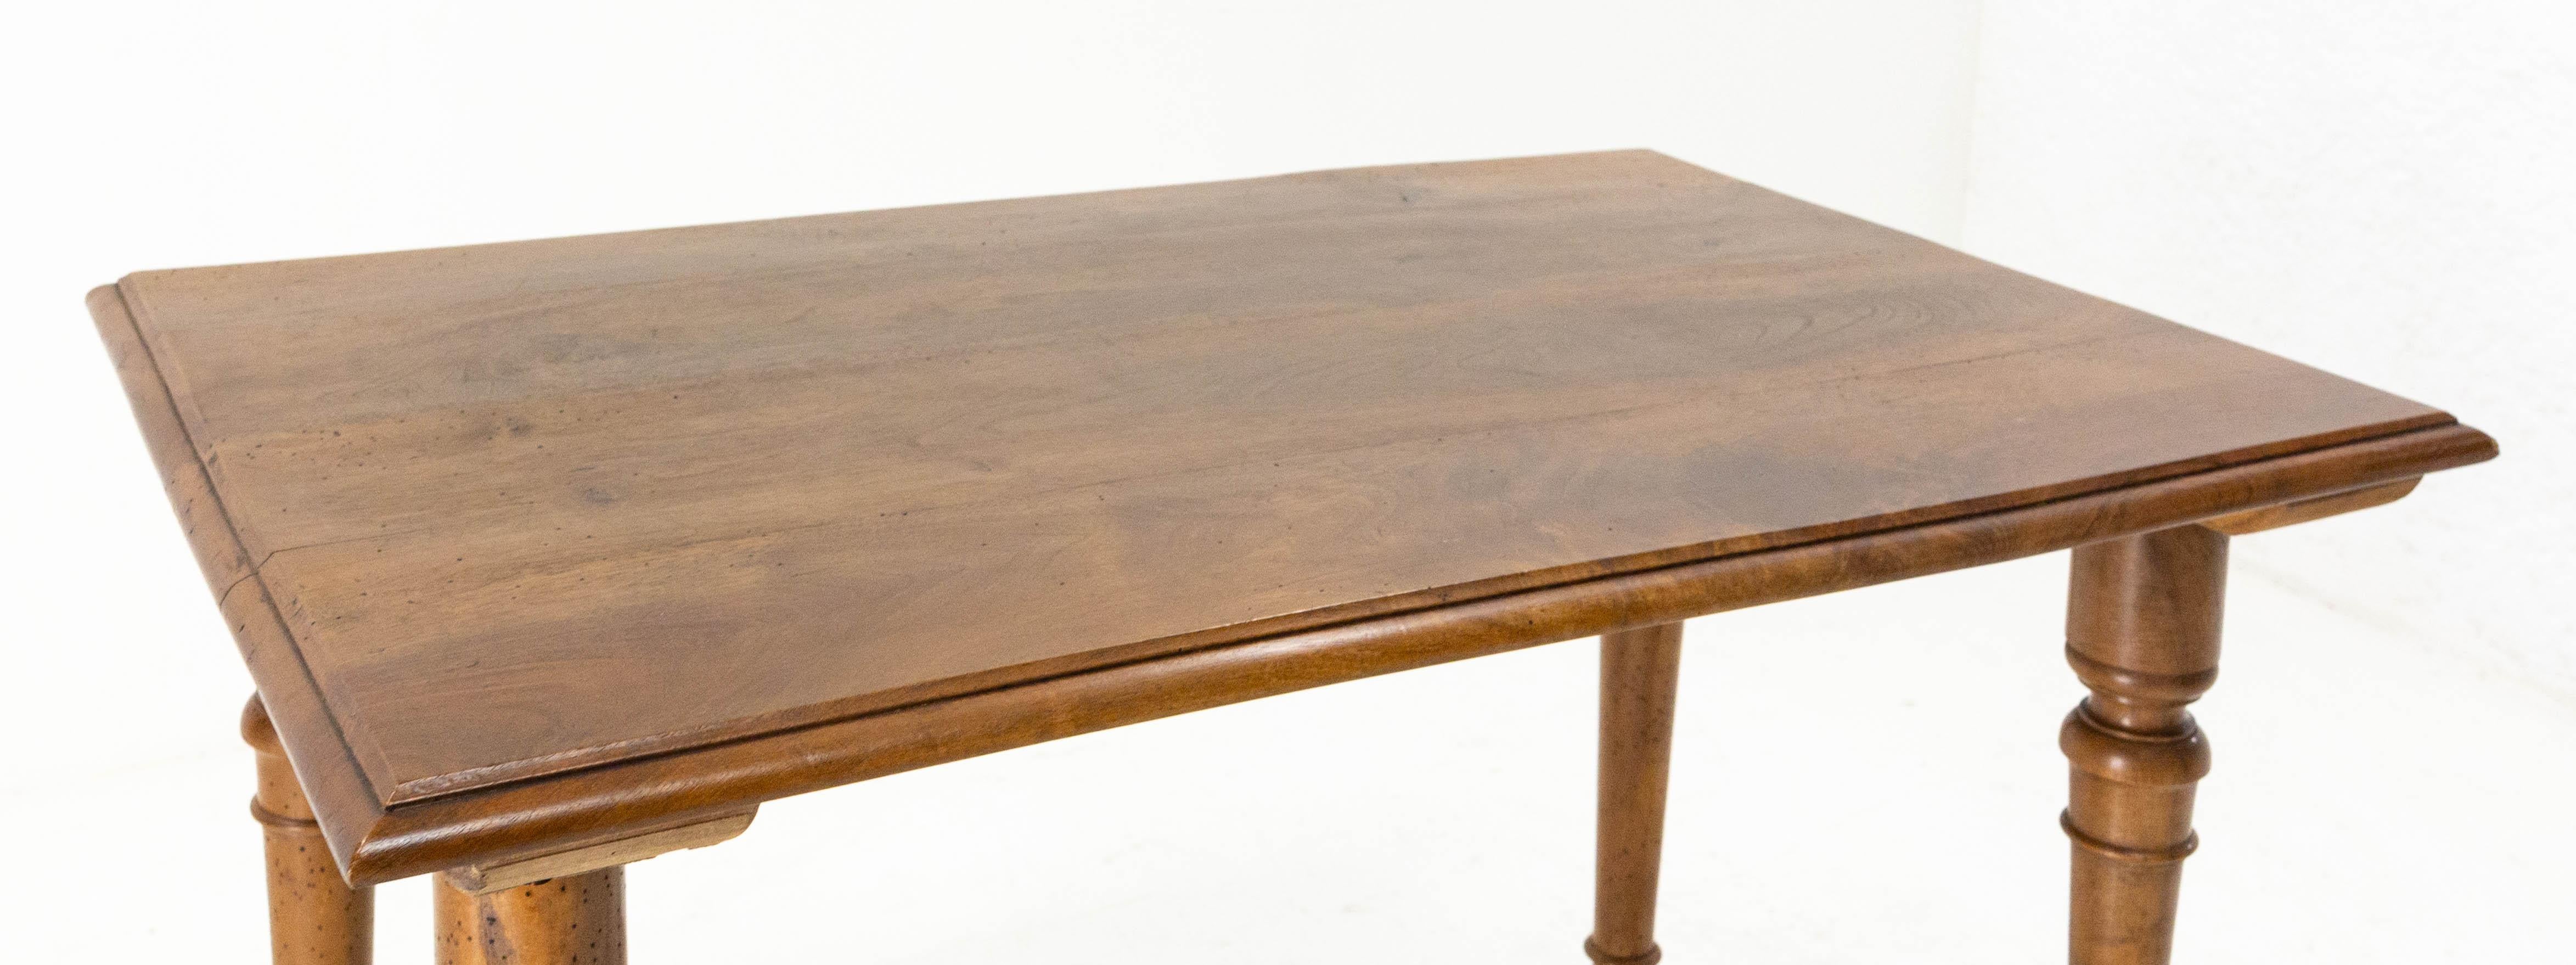 French Walnut Side Table or End Table Turned Legs, circa 1900 For Sale 1